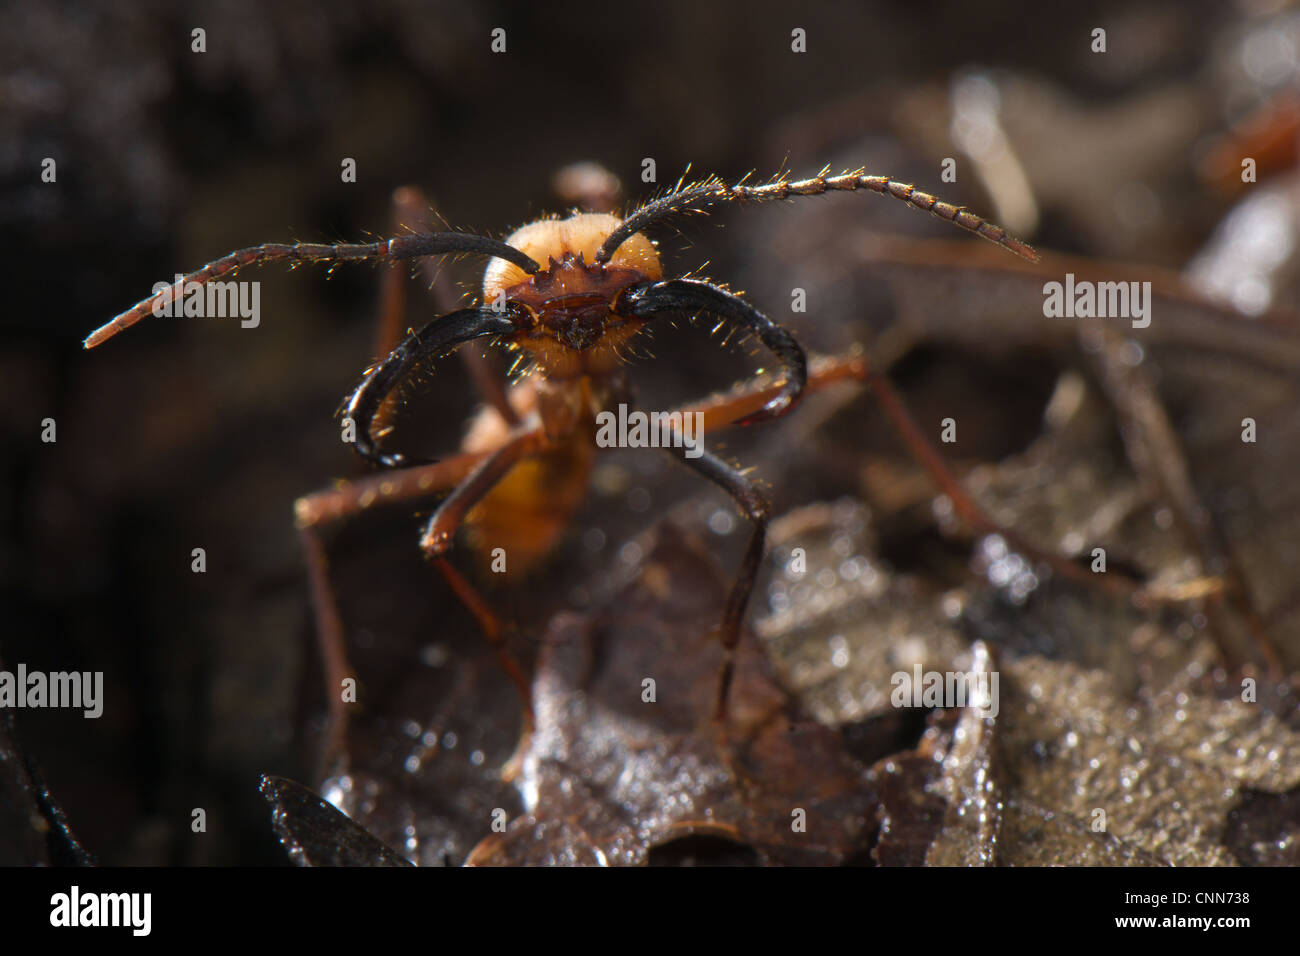 Army Ant Eciton burchellii adult soldier standing on leaf litter Los Amigos Biological Station MAdre de Dios Amazonia Peru Stock Photo